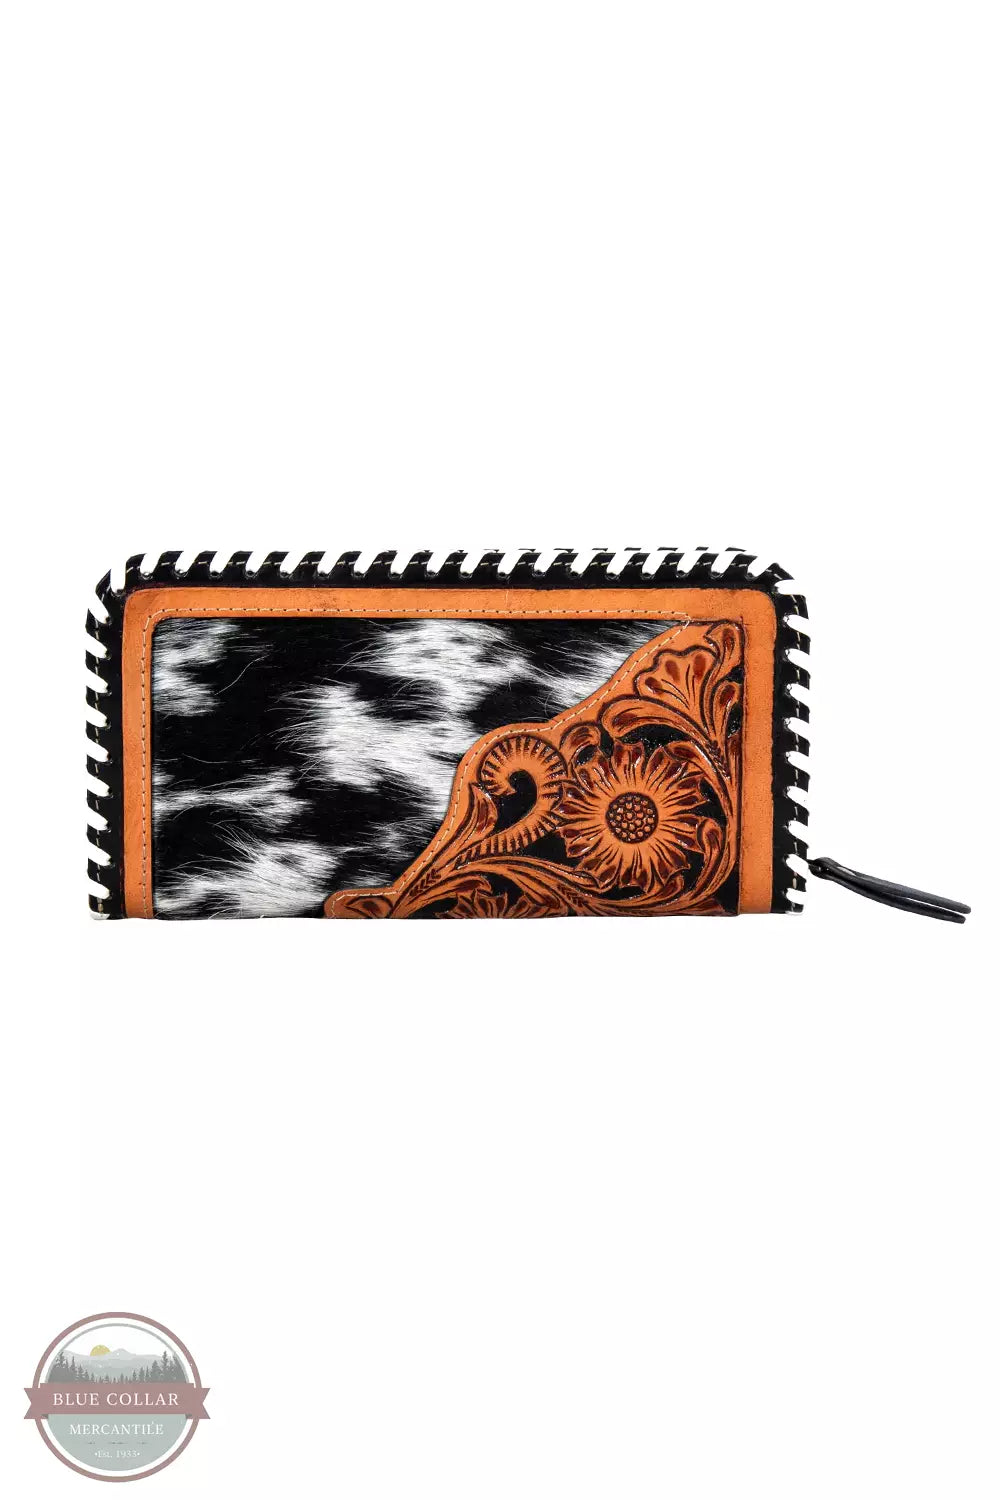 Myra Bag S-8698 Pecos Plains Stitched Hand-Tooled Wallet Back View